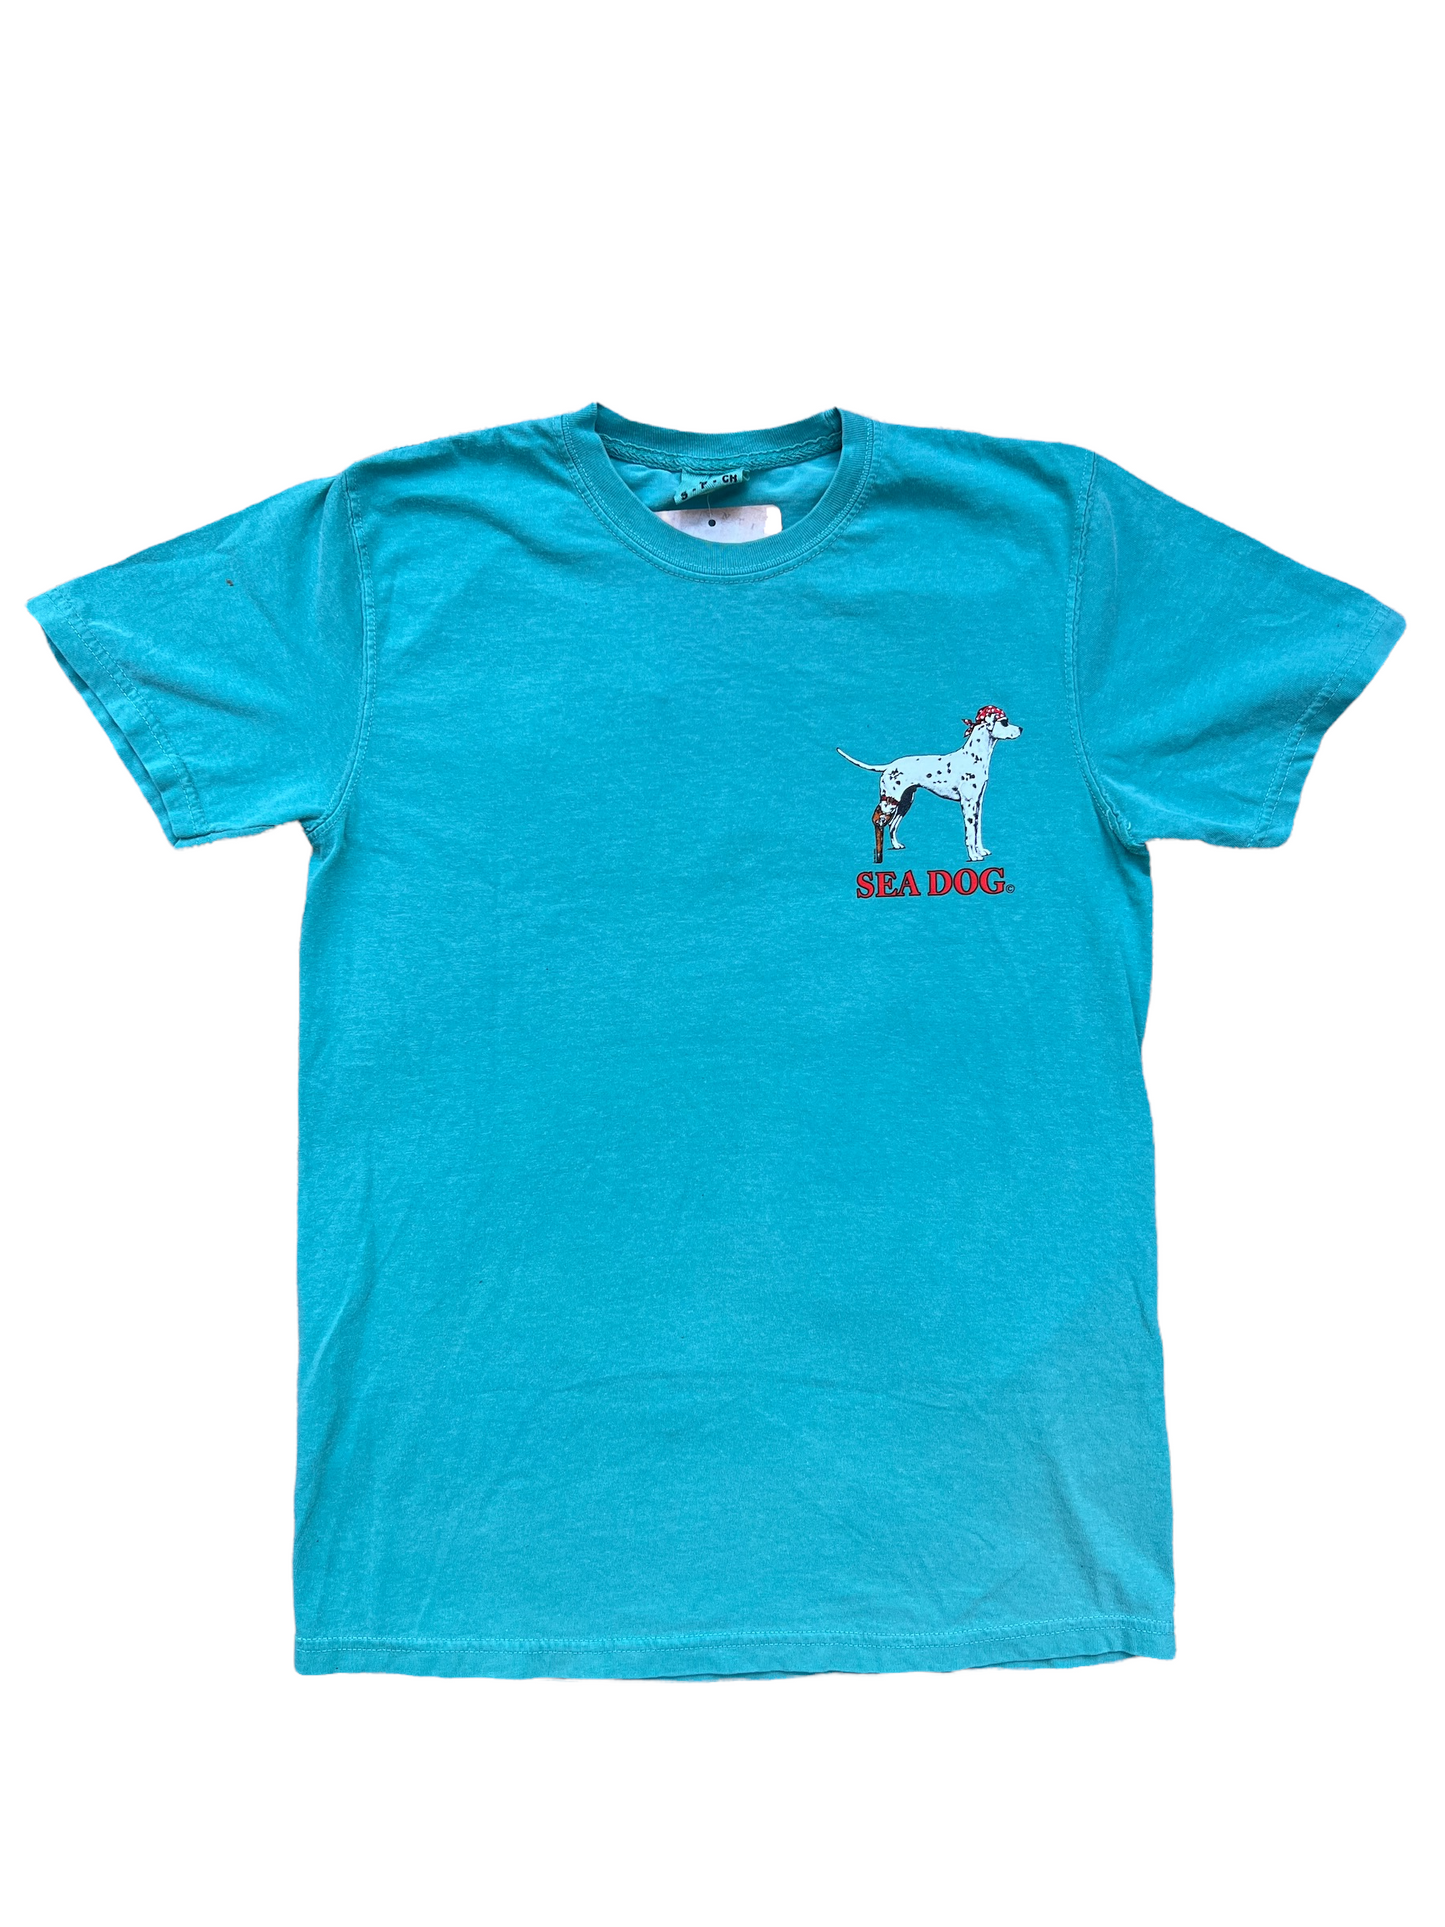 Proud To Have Served  Seadog - T Shirt - Seafoam